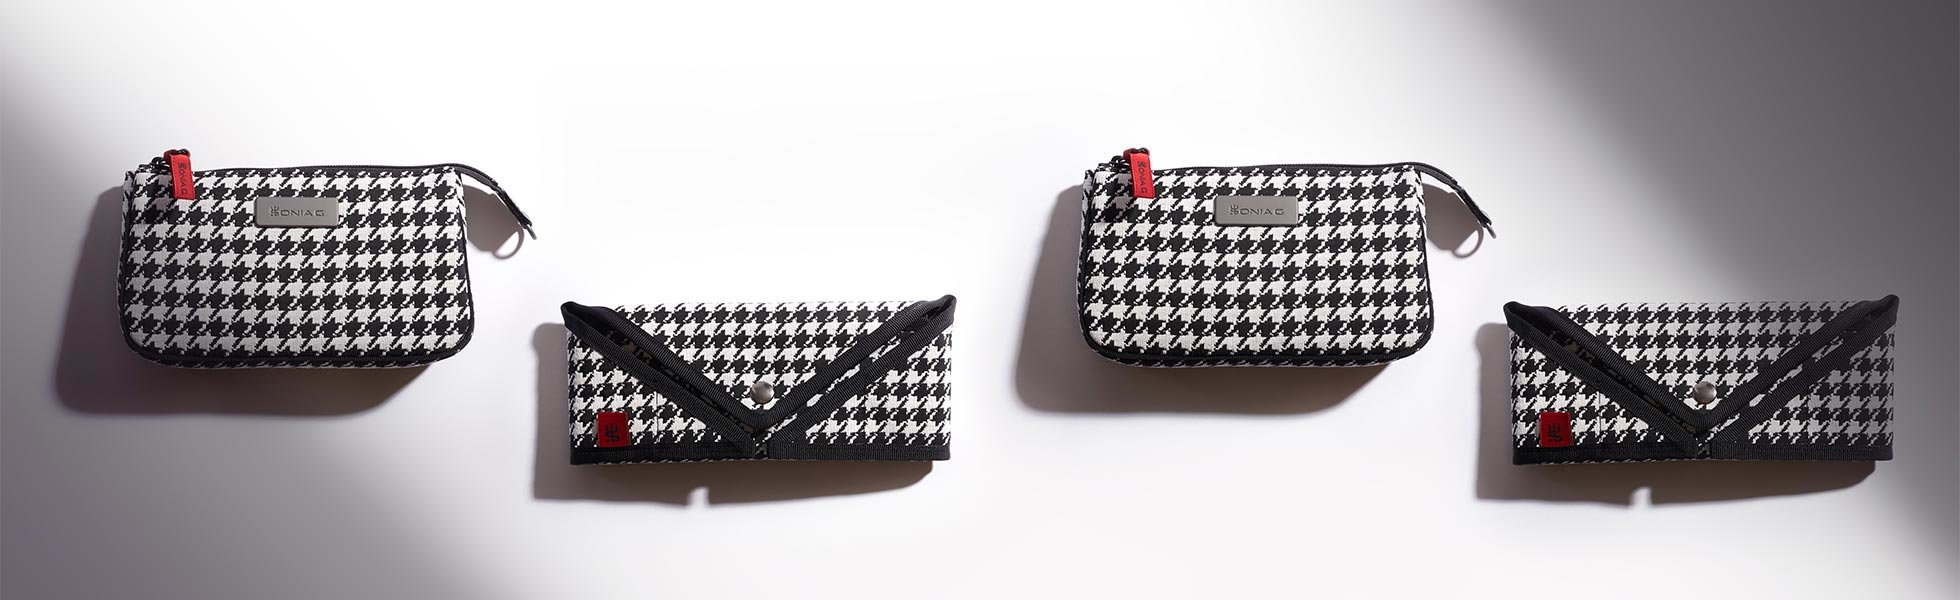 Sonia G. Houndstooth Collection